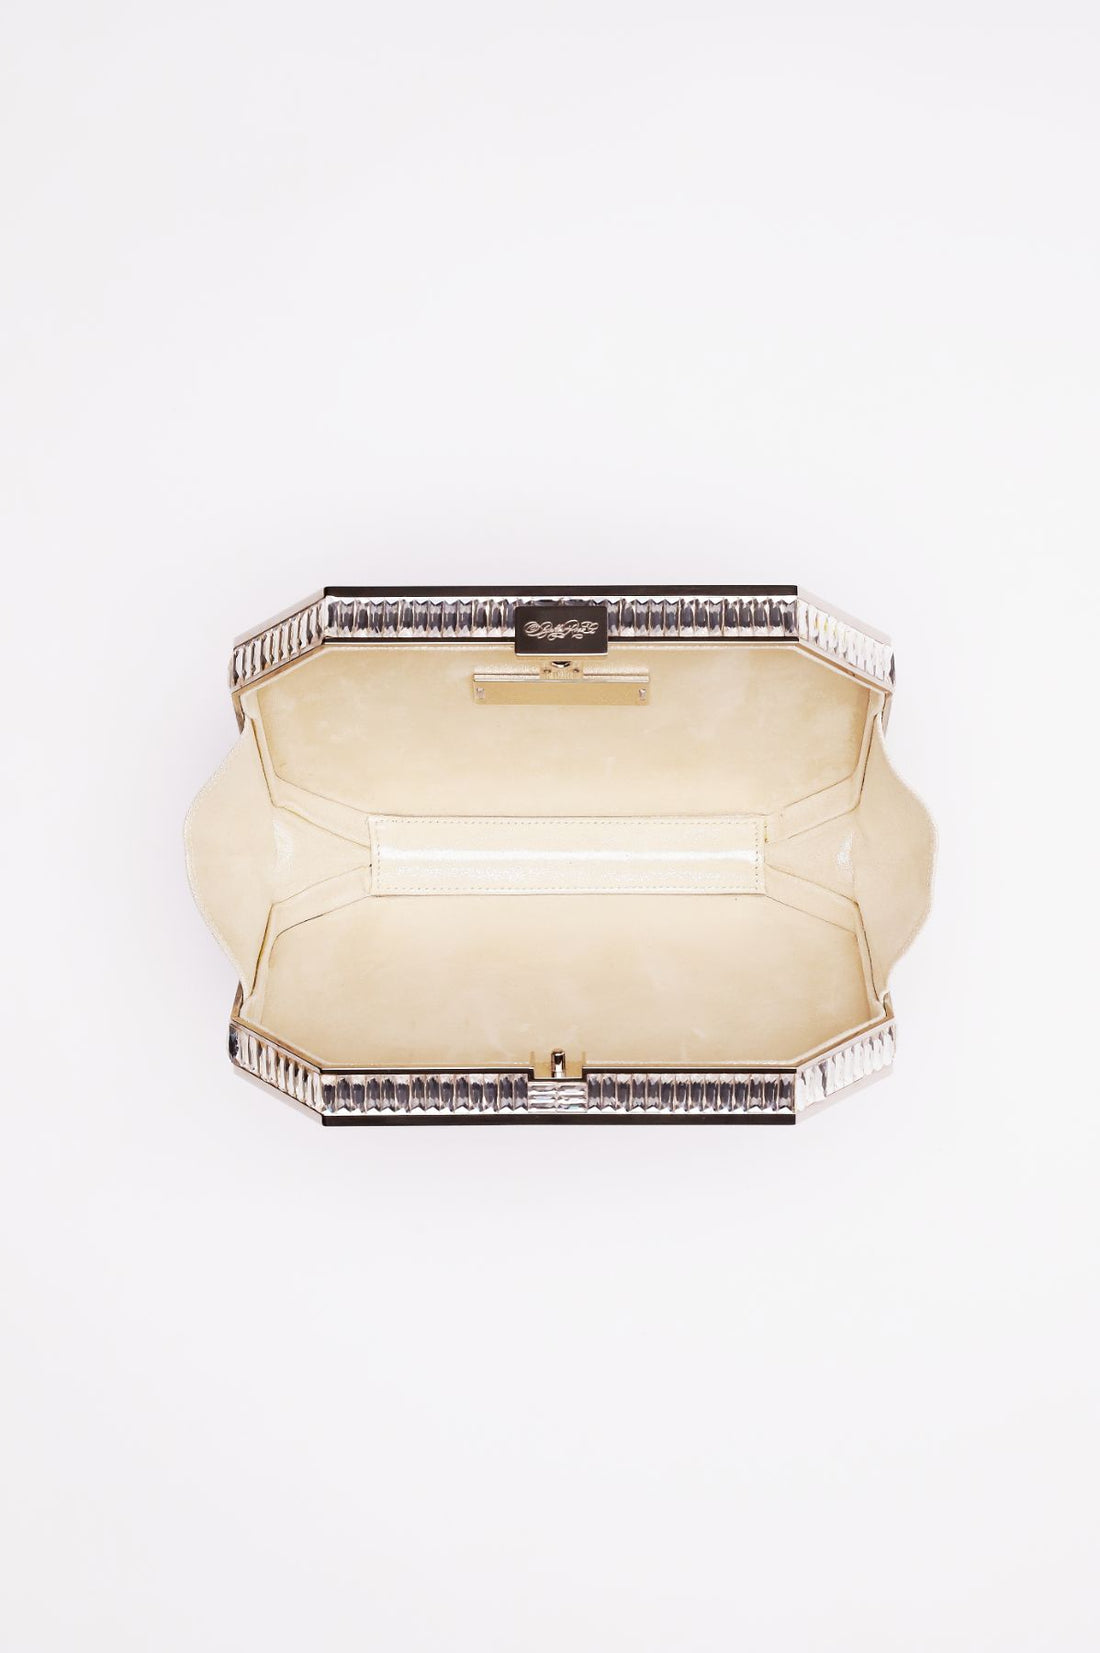 Top open view of Como Clutch with a octagon silhouette in black satin and silver gemmed frame.